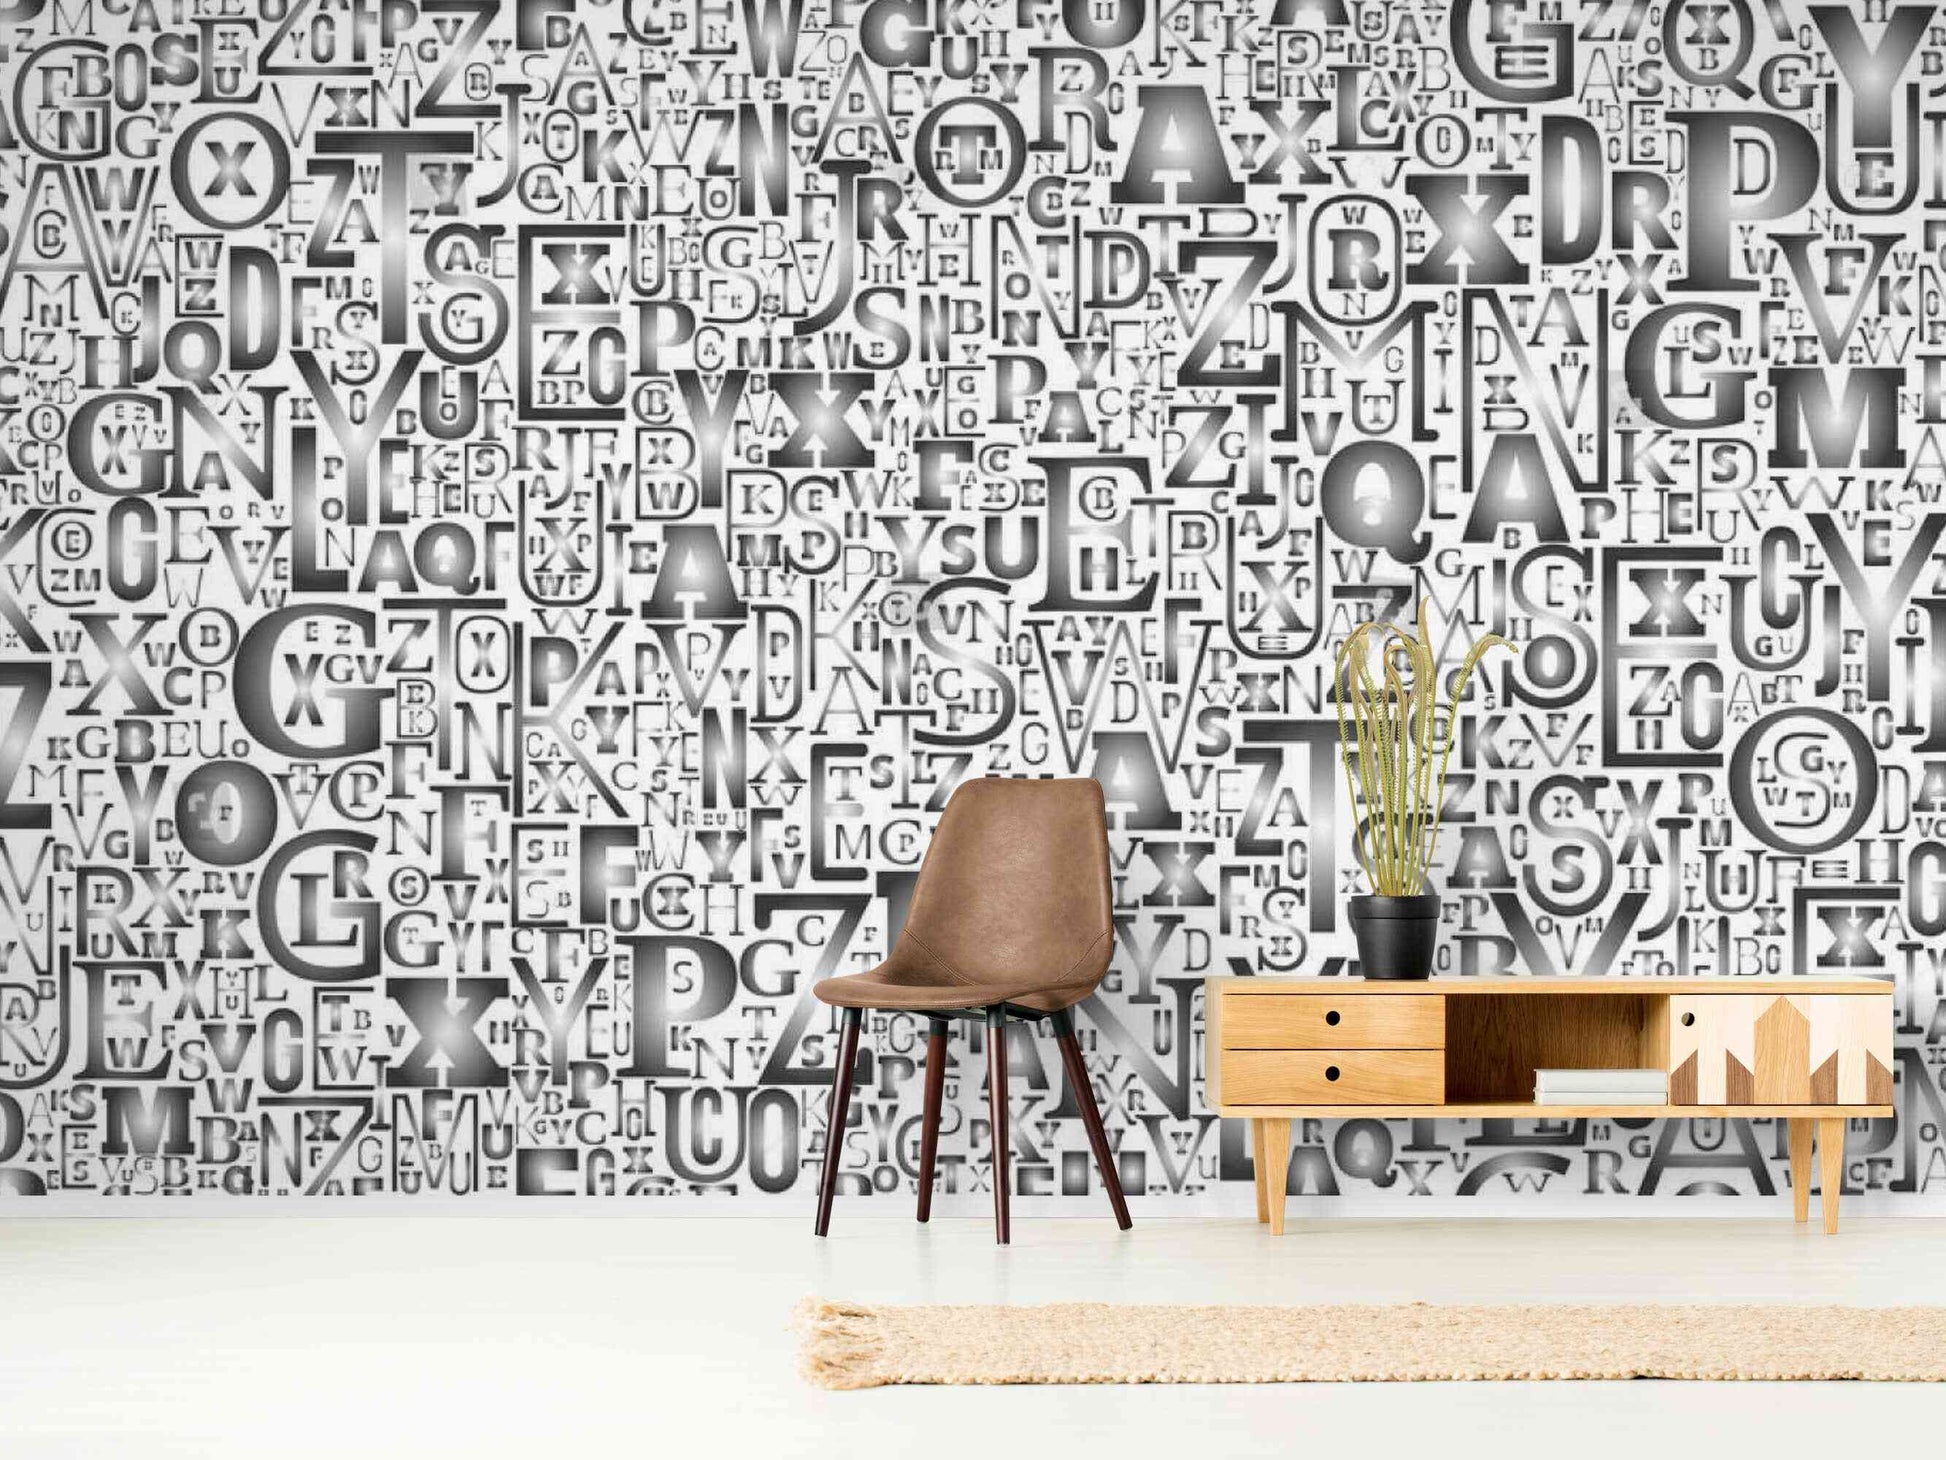 A gray graffiti wall decal with letters and symbols